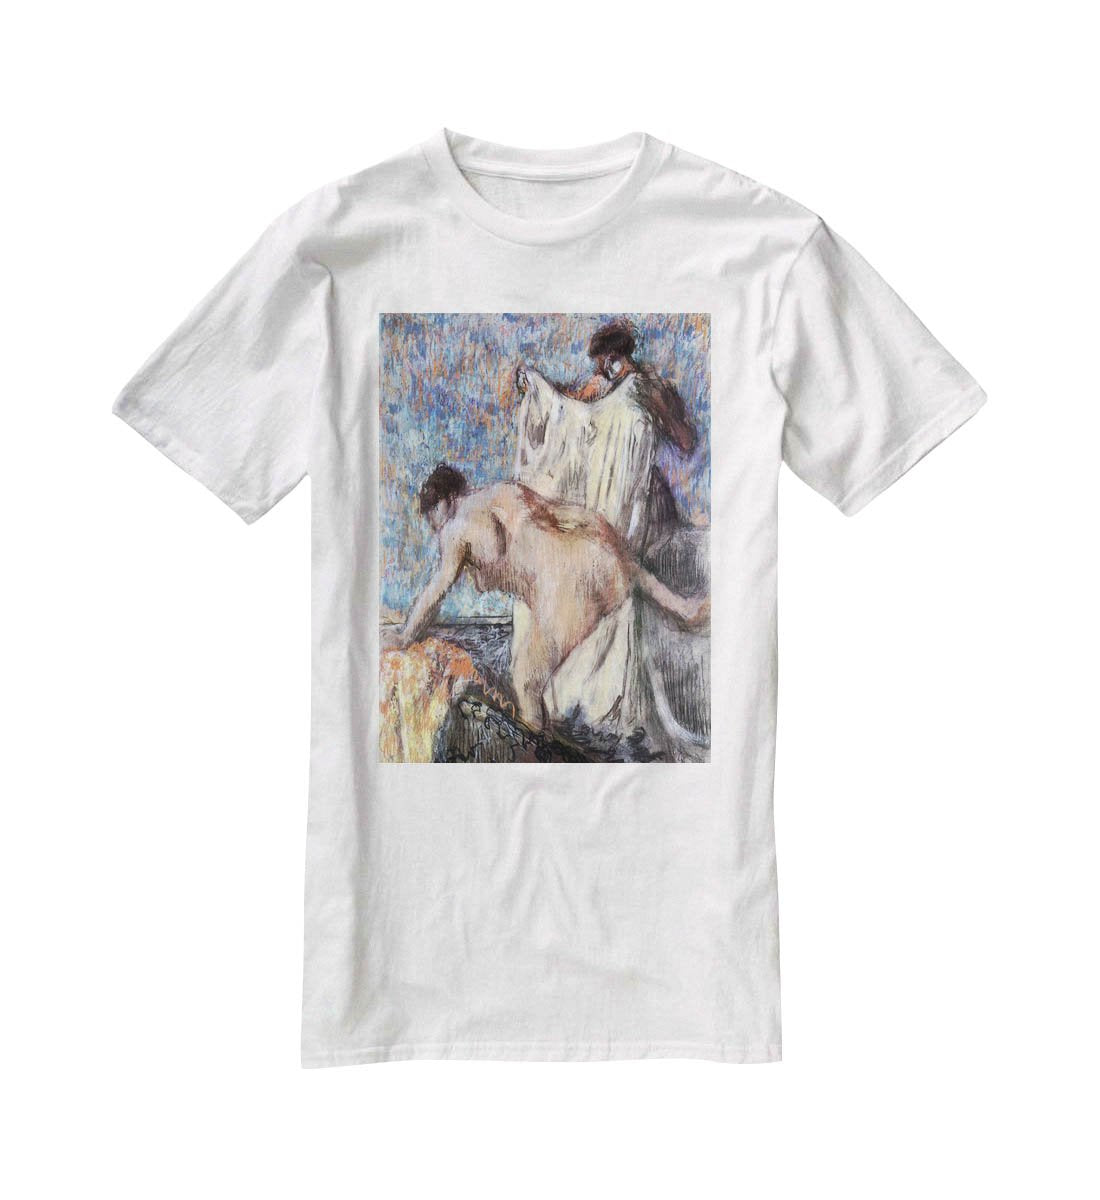 After bathing 3 by Degas T-Shirt - Canvas Art Rocks - 5